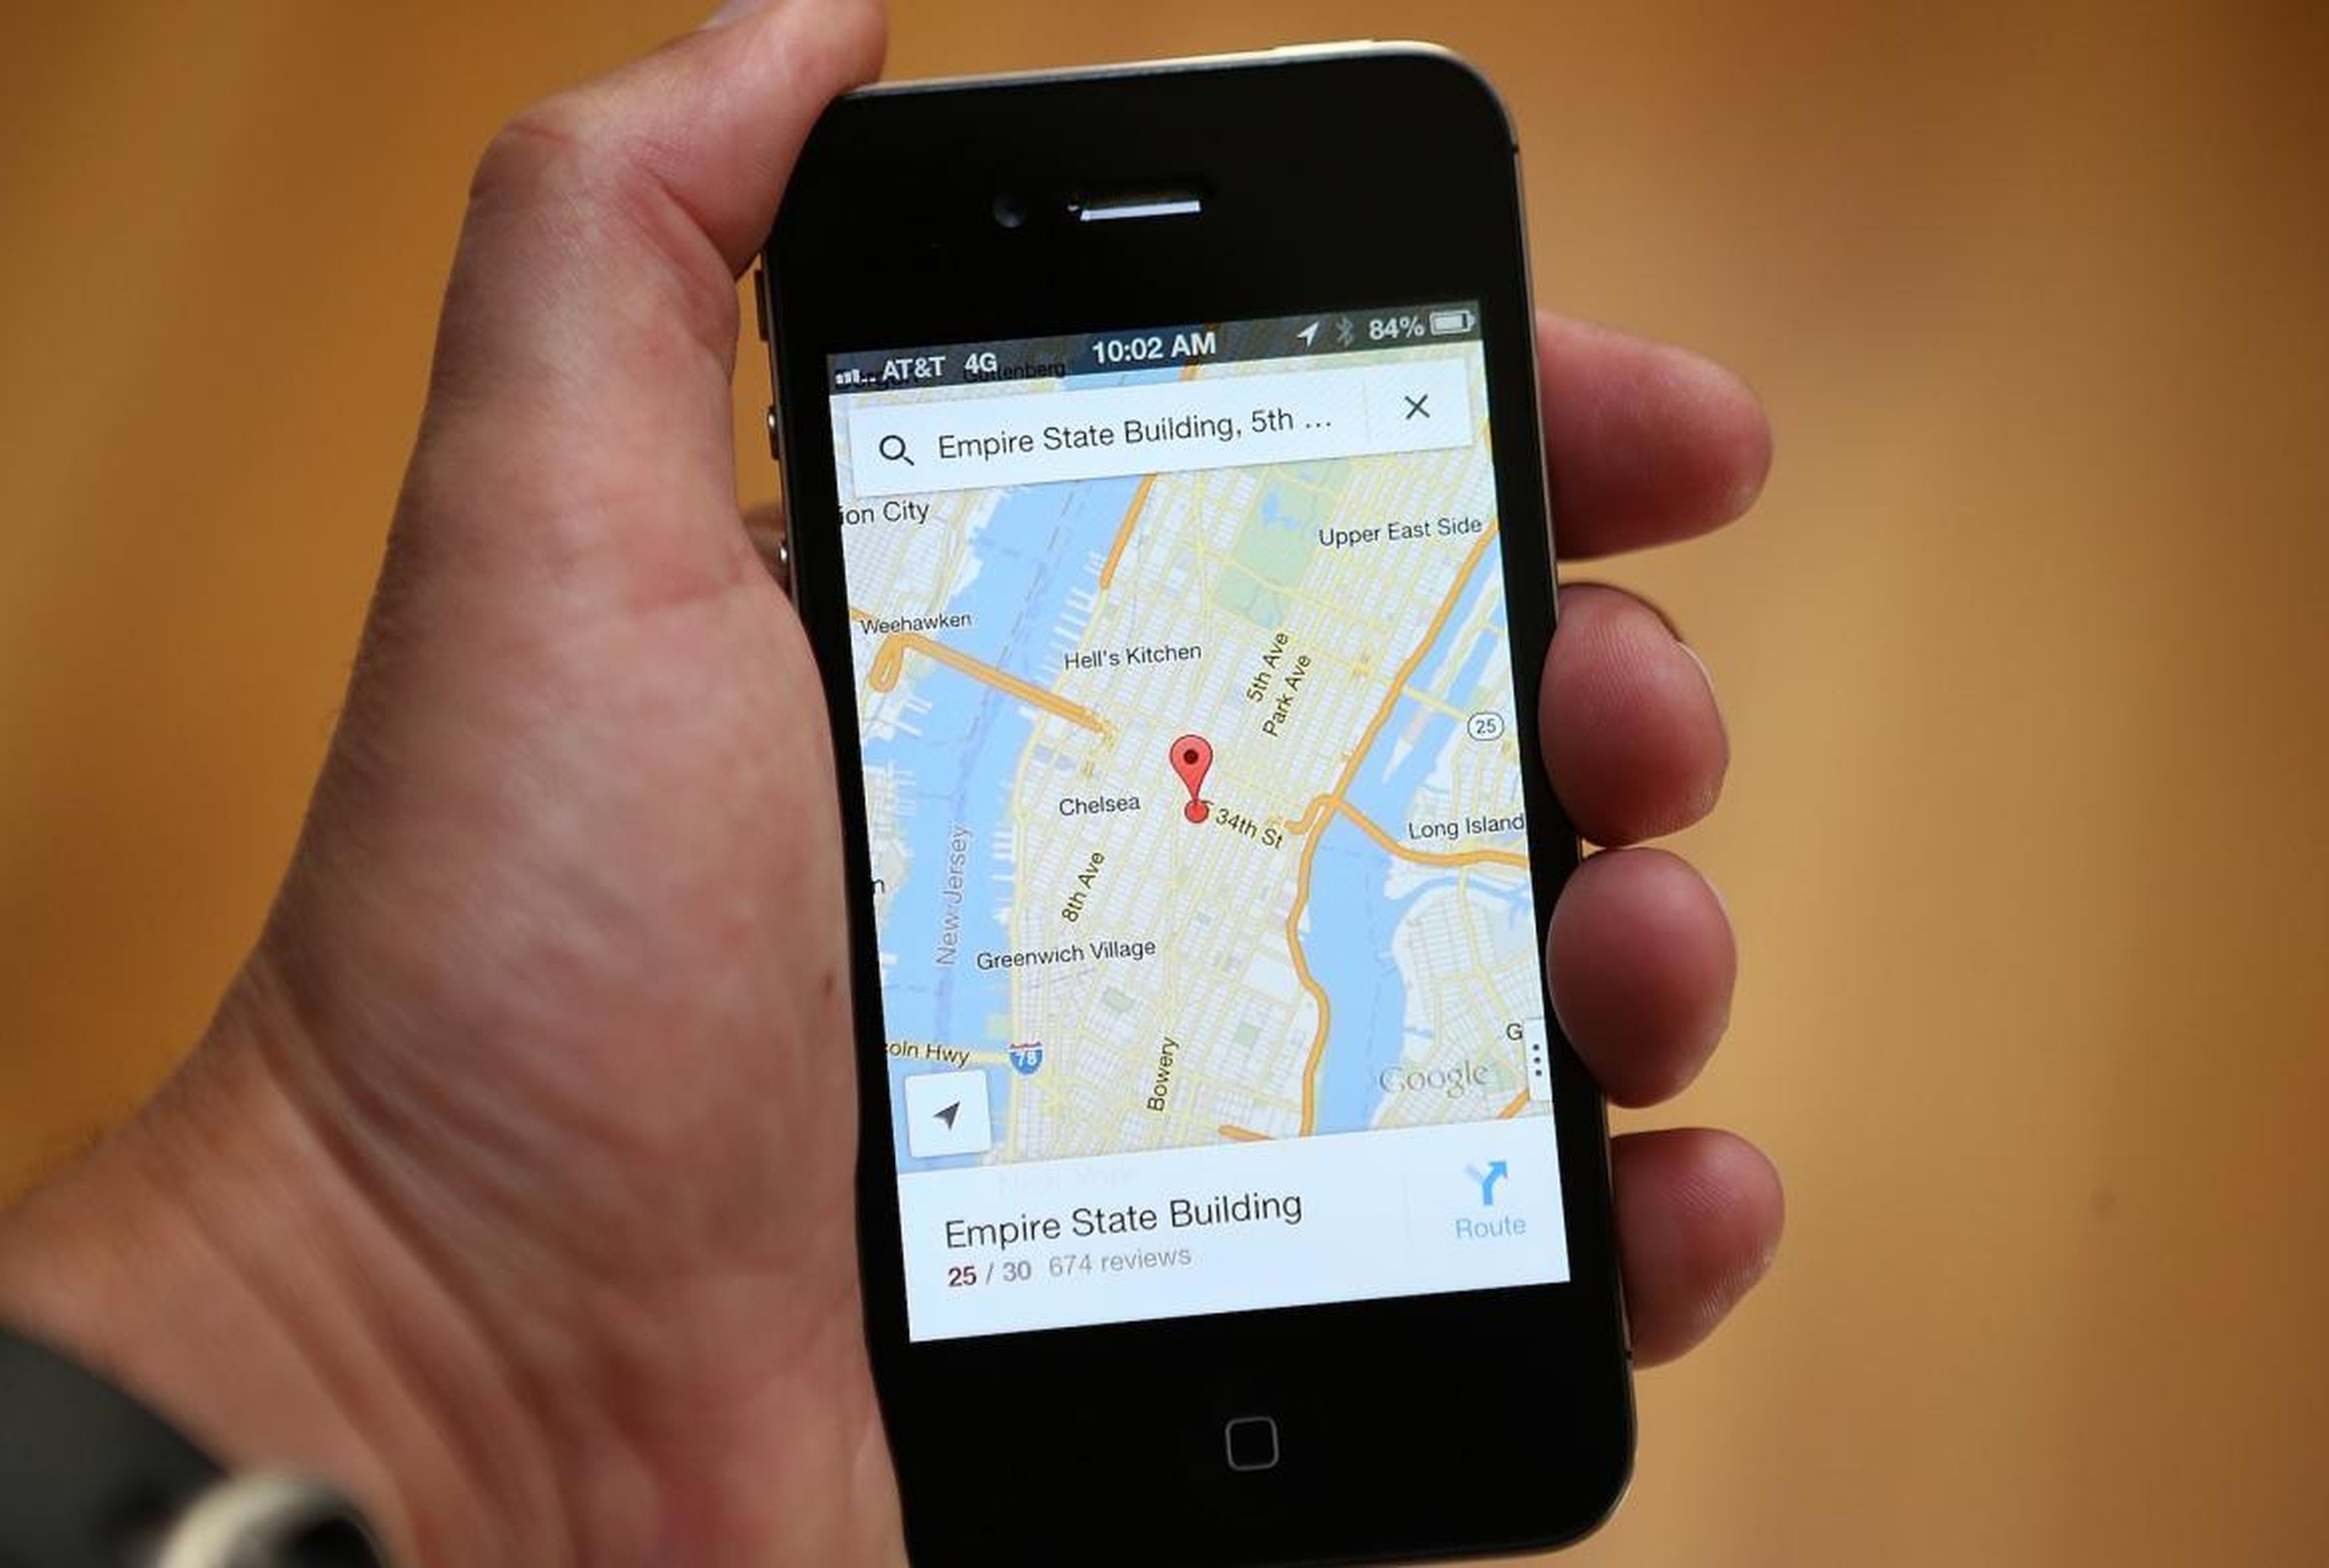 Some apps can track your phone's location more than 14,000 times a day — here's how to turn that off if you own an iPhone or Android